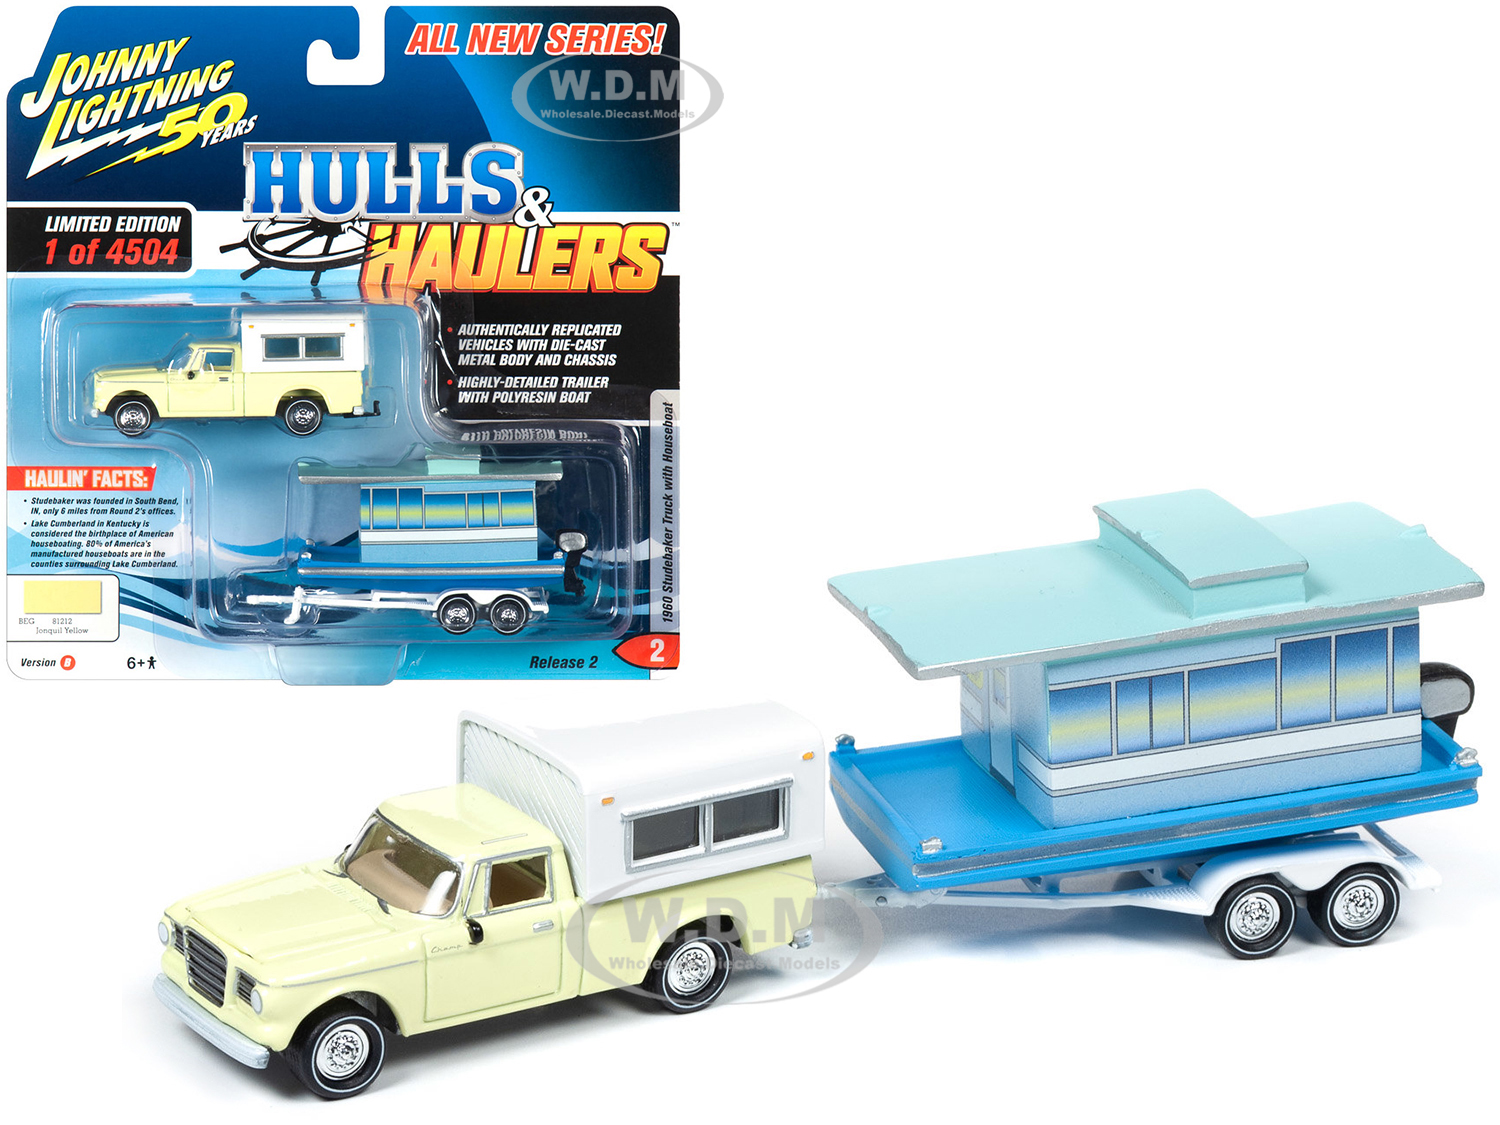 1960 Studebaker Pickup Truck with Camper Shell Jonquil Yellow with Houseboat Limited Edition to 4504 pieces Worldwide Hulls & Haulers Series 2 Johnny Lightning 50th Anniversary 1/64 Diecast Model Car by Johnny Lightning